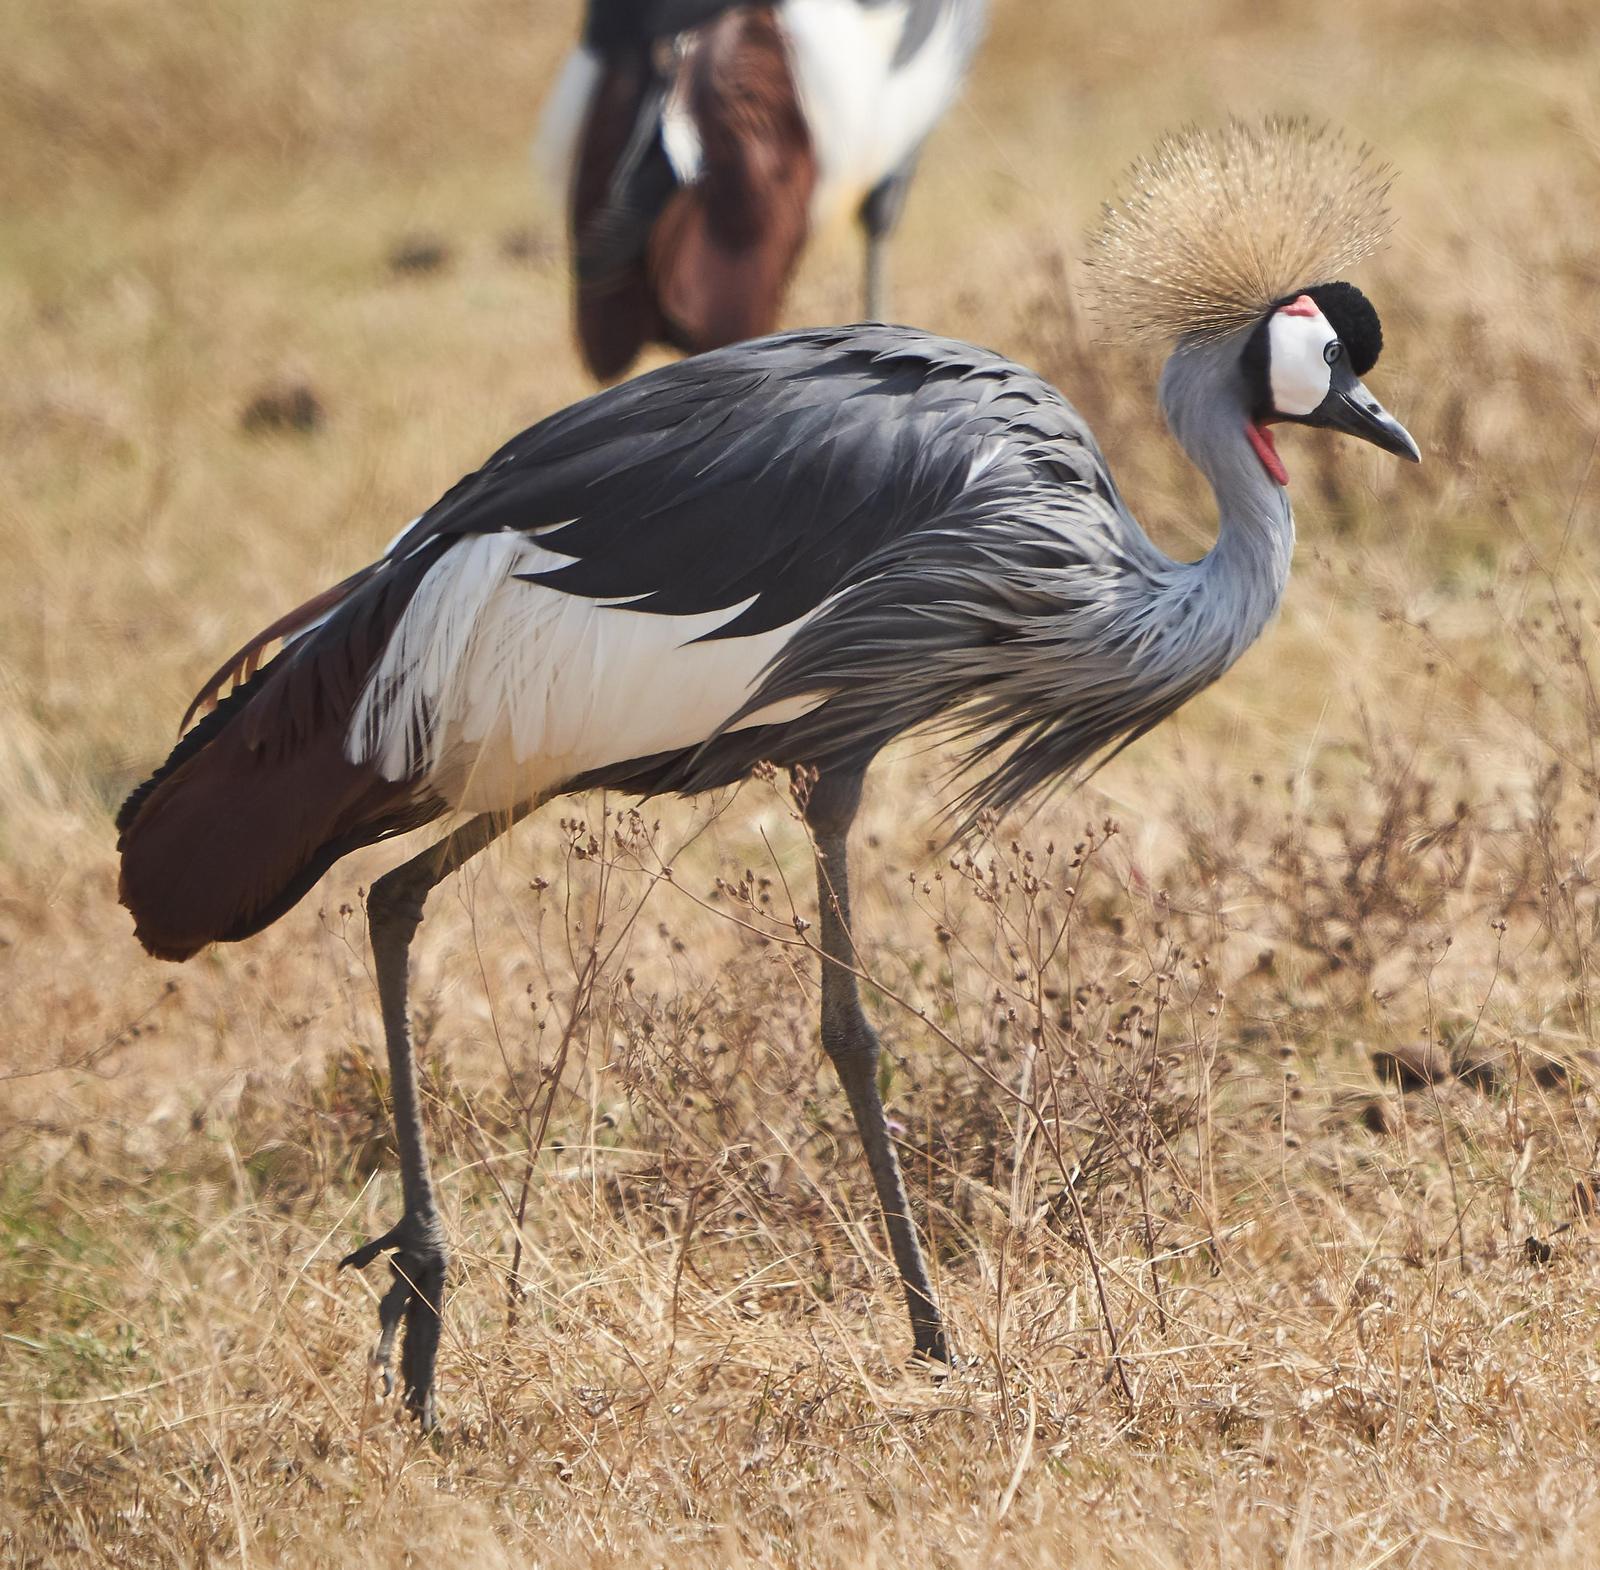 Gray Crowned-Crane Photo by Steven Cheong